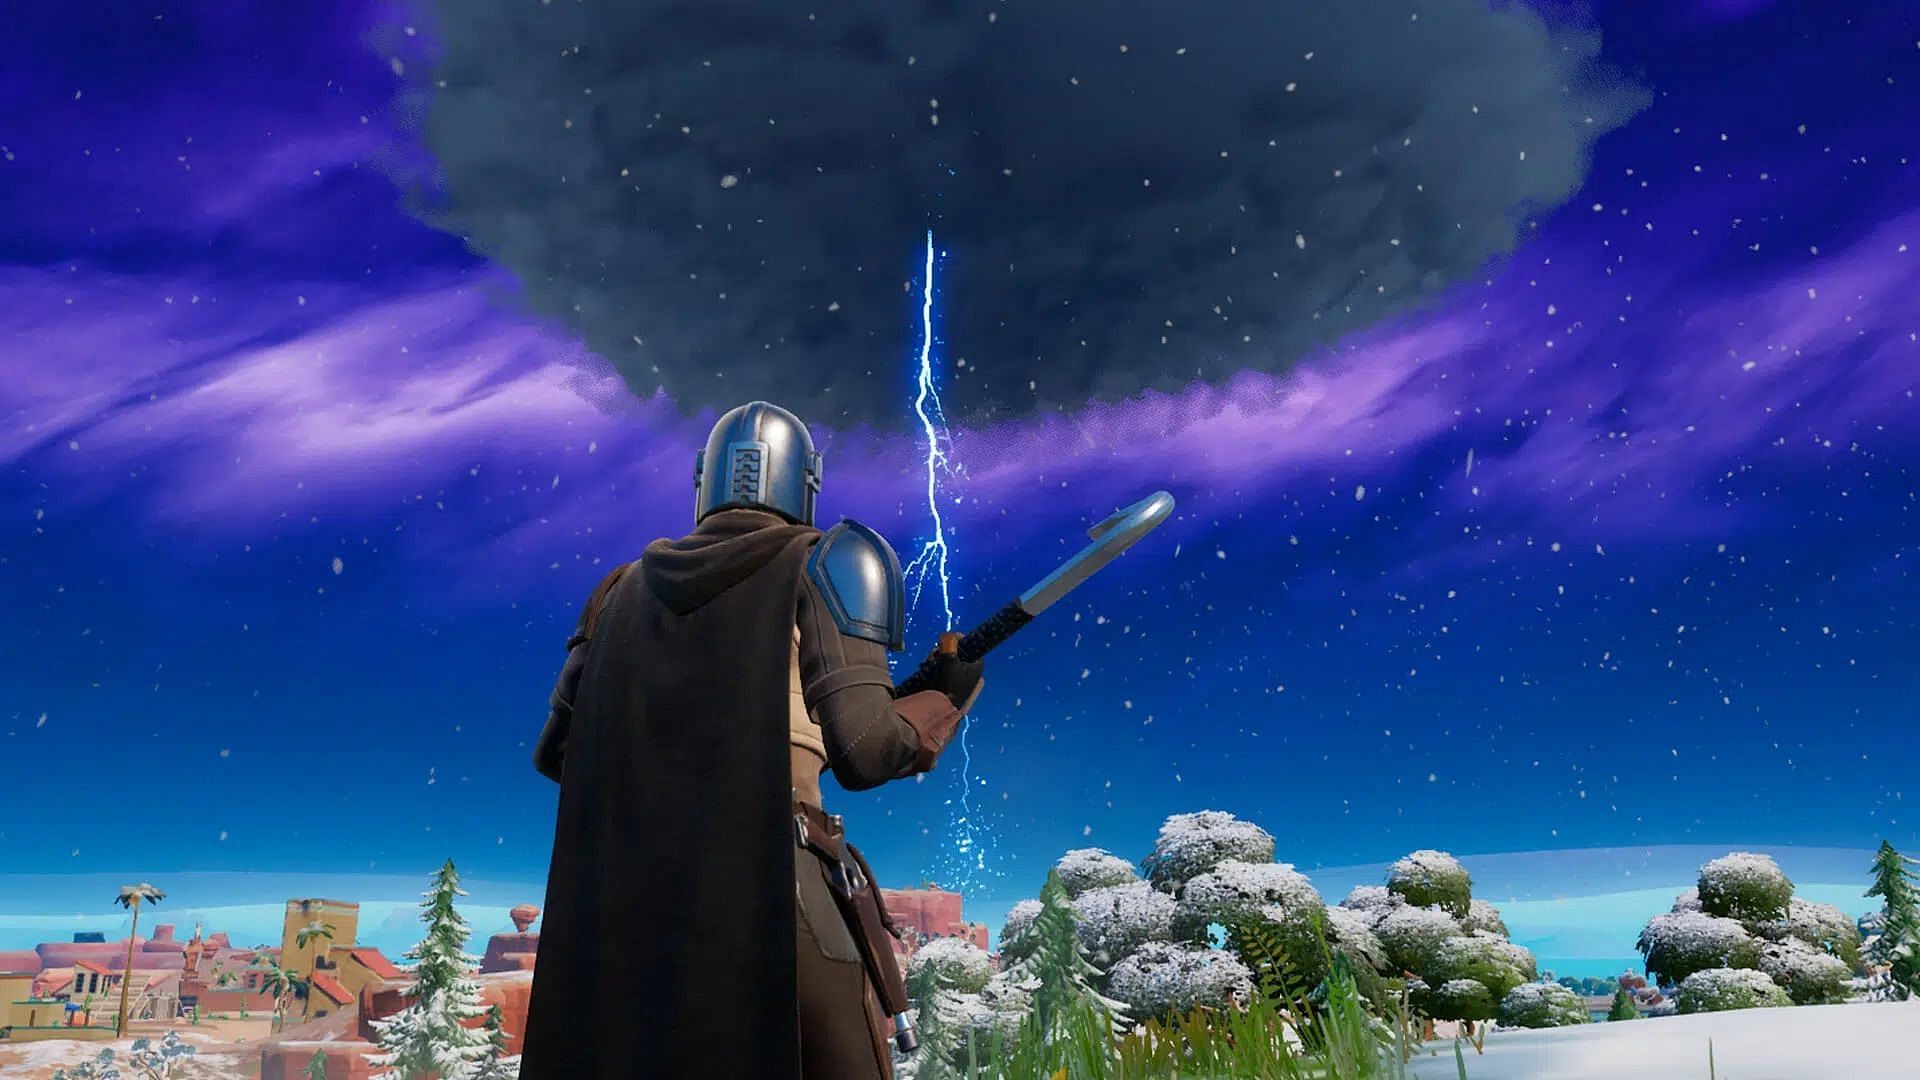 New Fortnite items will let players control storms and tornadoes (Image via Epic Games)